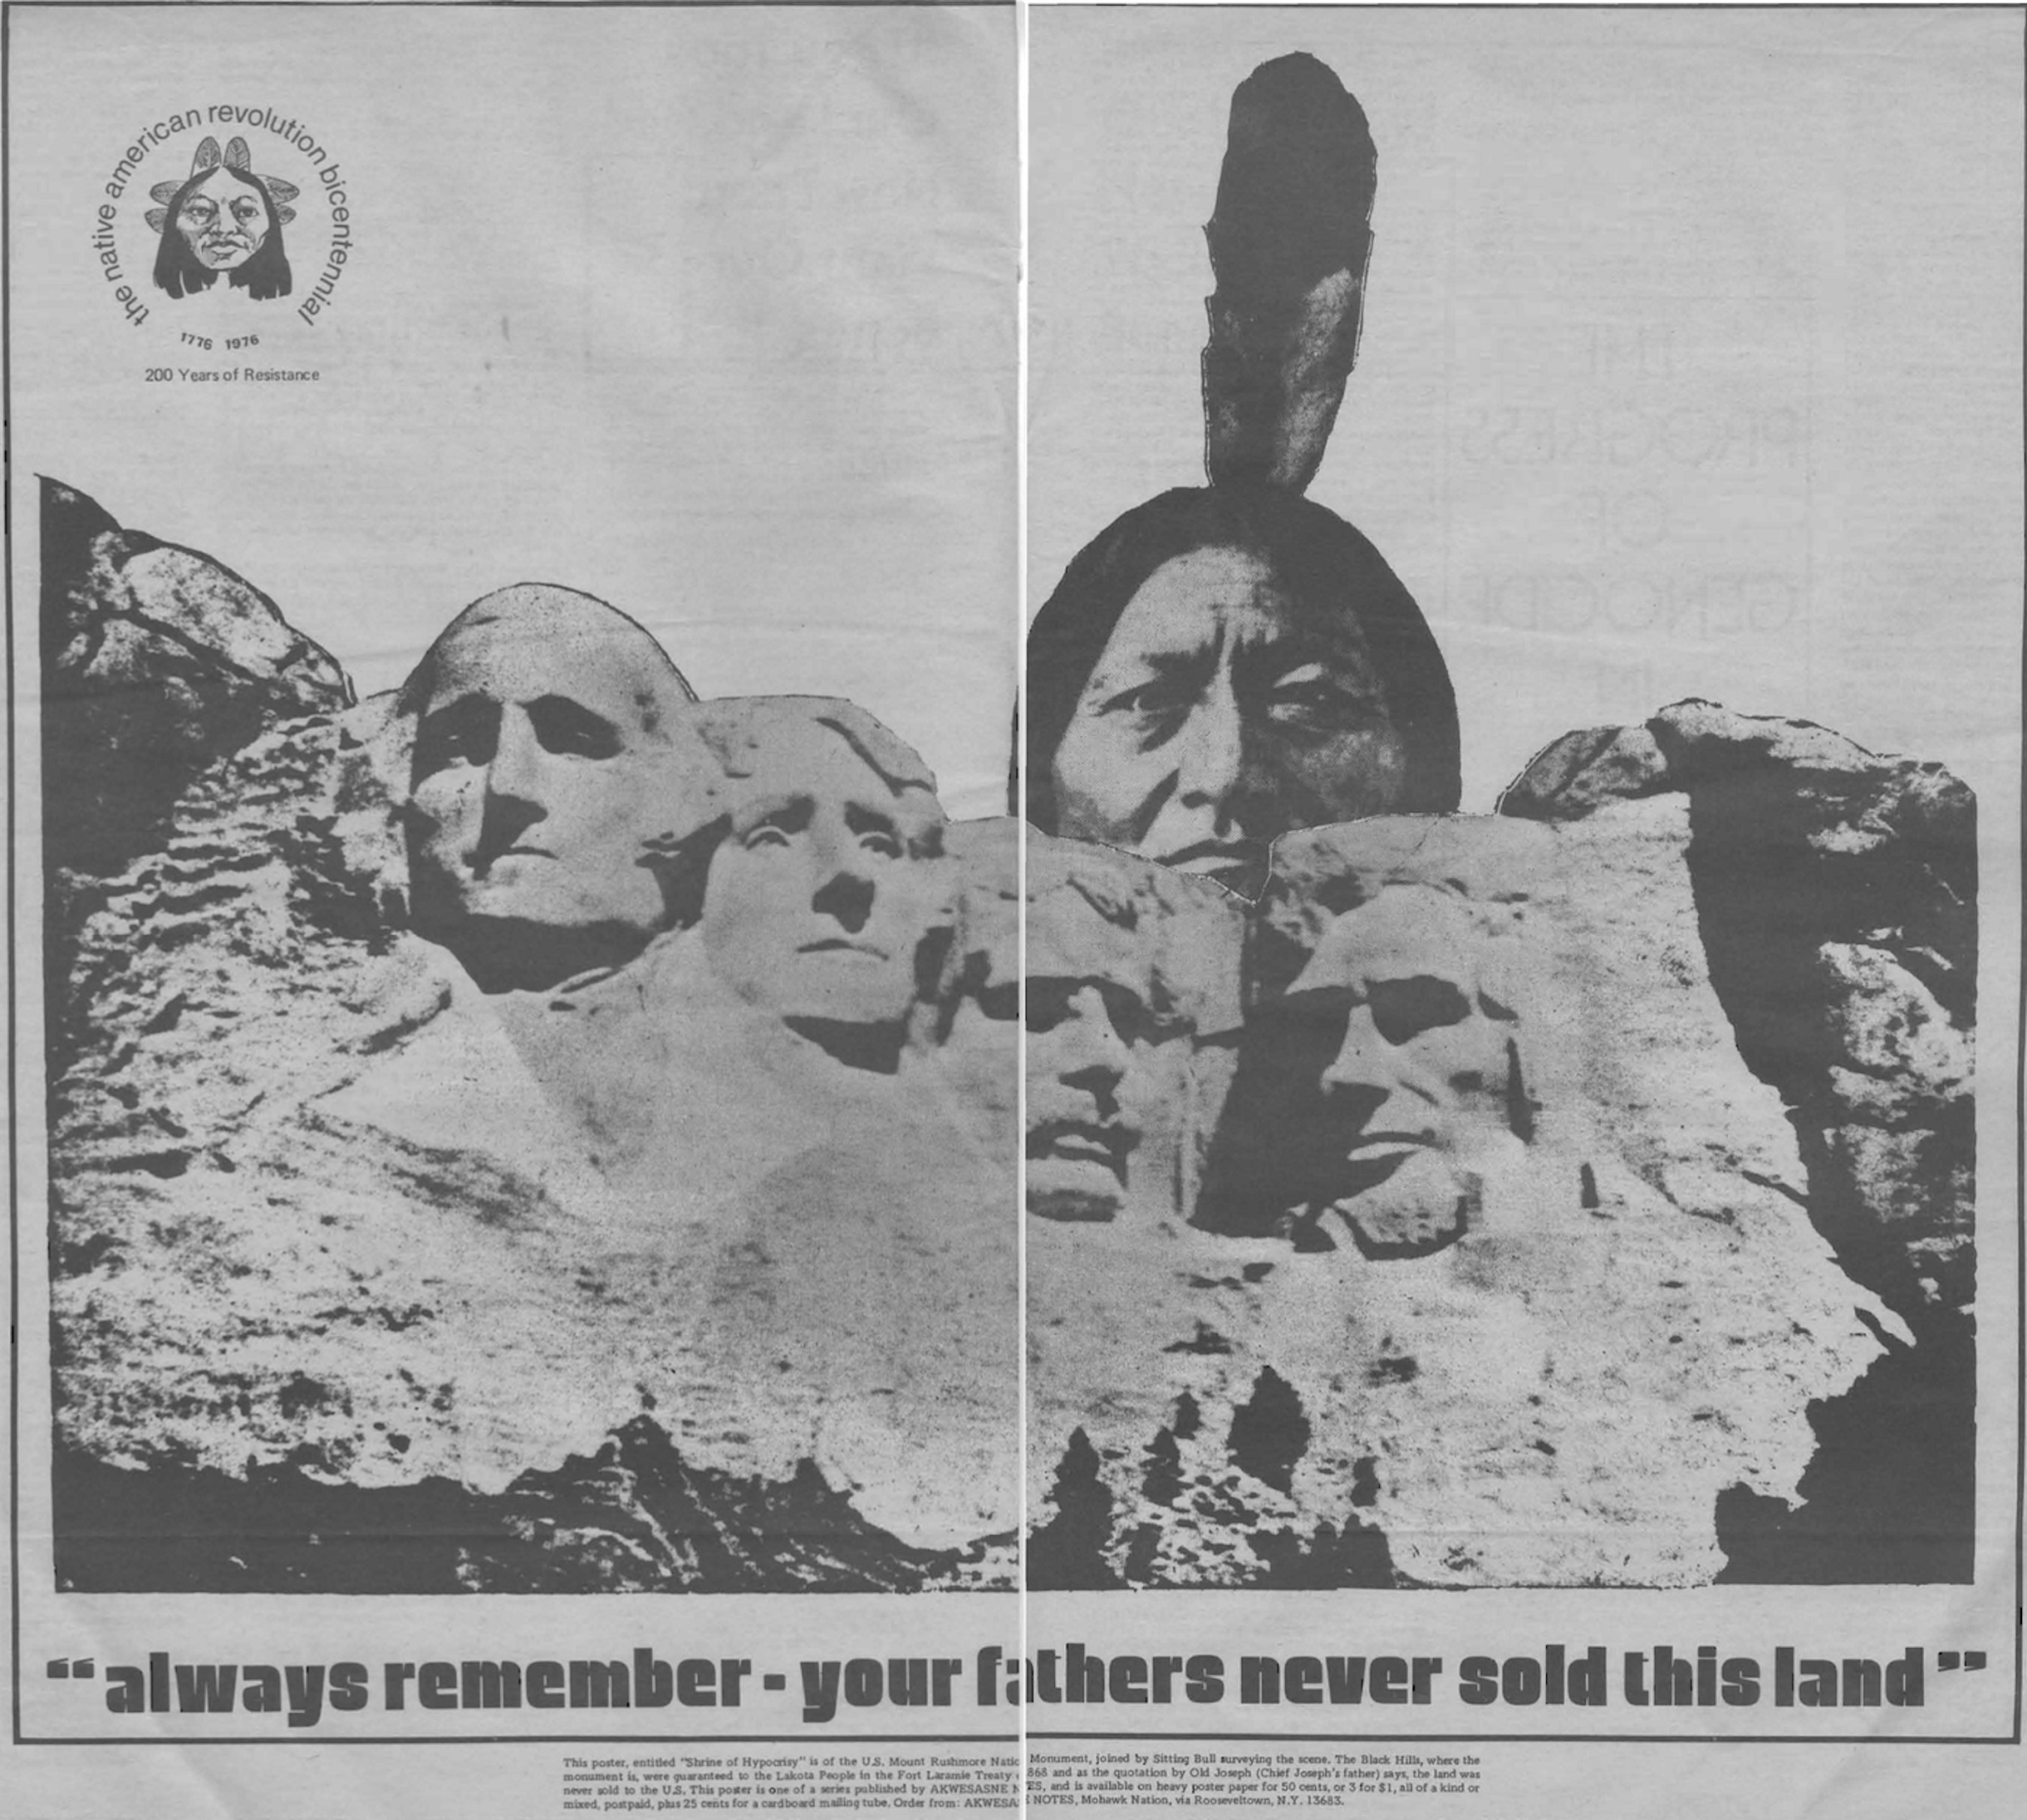 Black-and-white duotone photograph of Mount Rushmore with the head of a Native American rising above it from behind